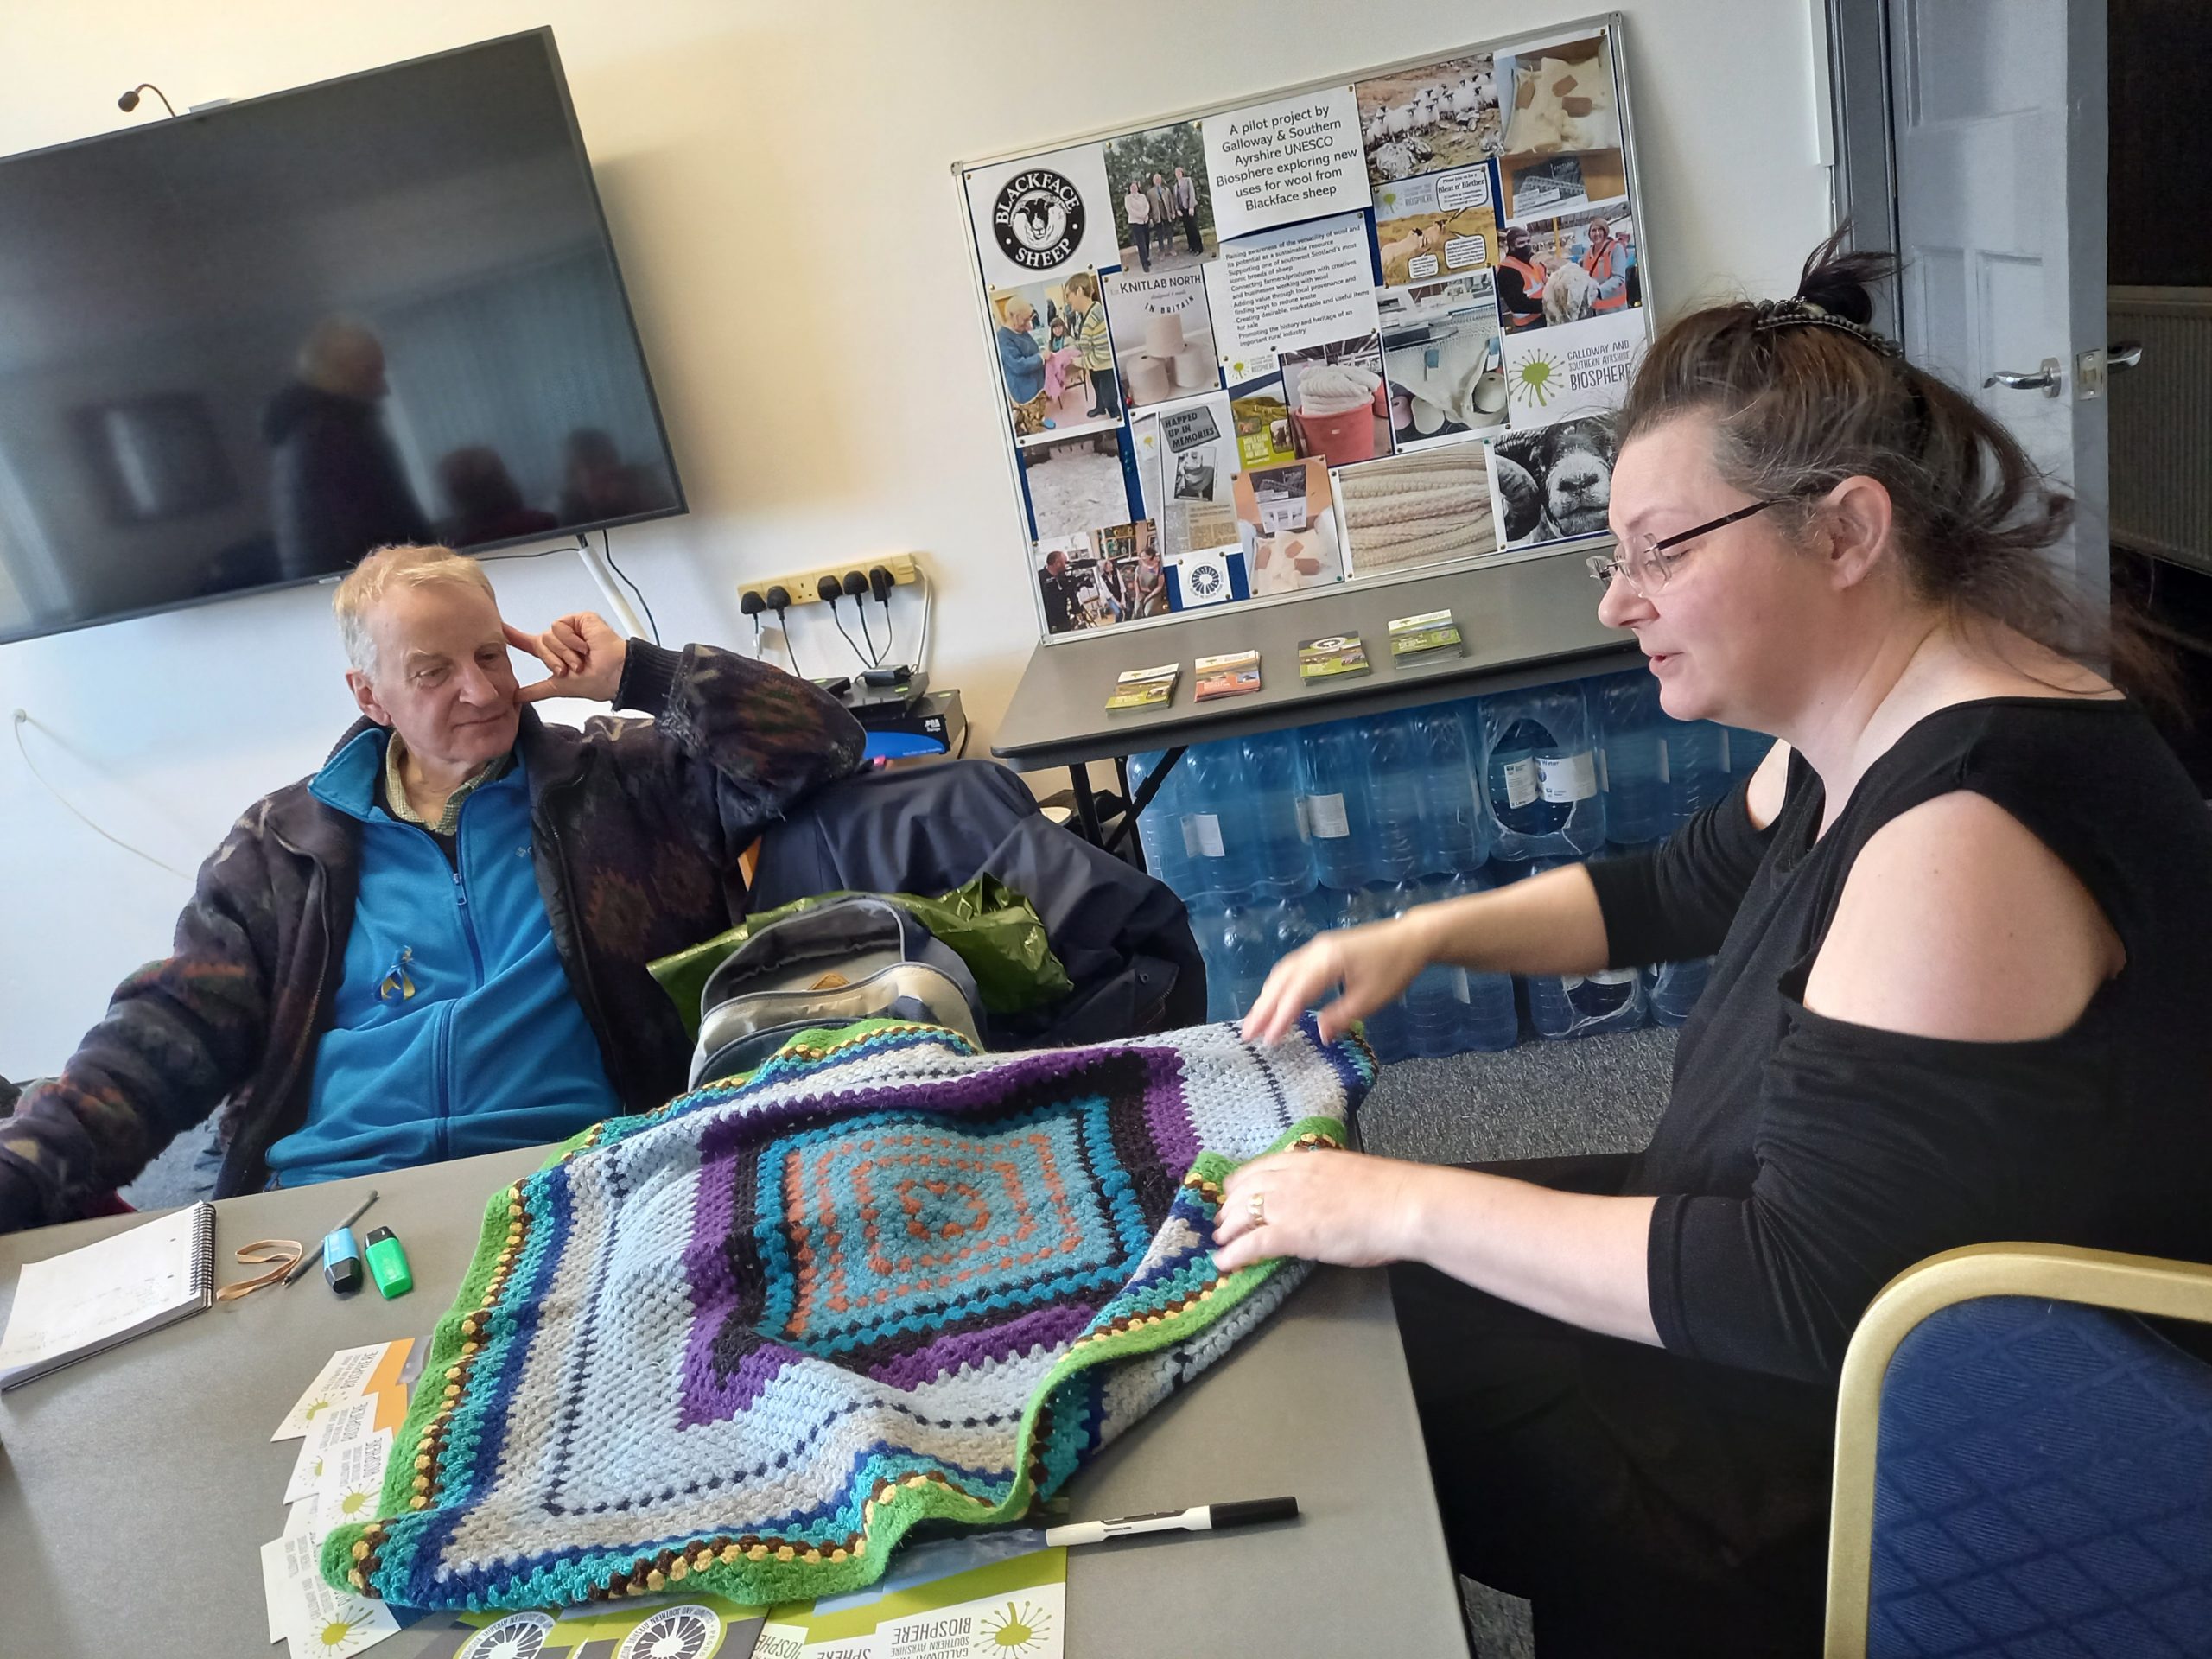 Members of The Wool gathering looking at a 50yr old crocheted pram blanket at the Barrhill Bleat n' Blether event.